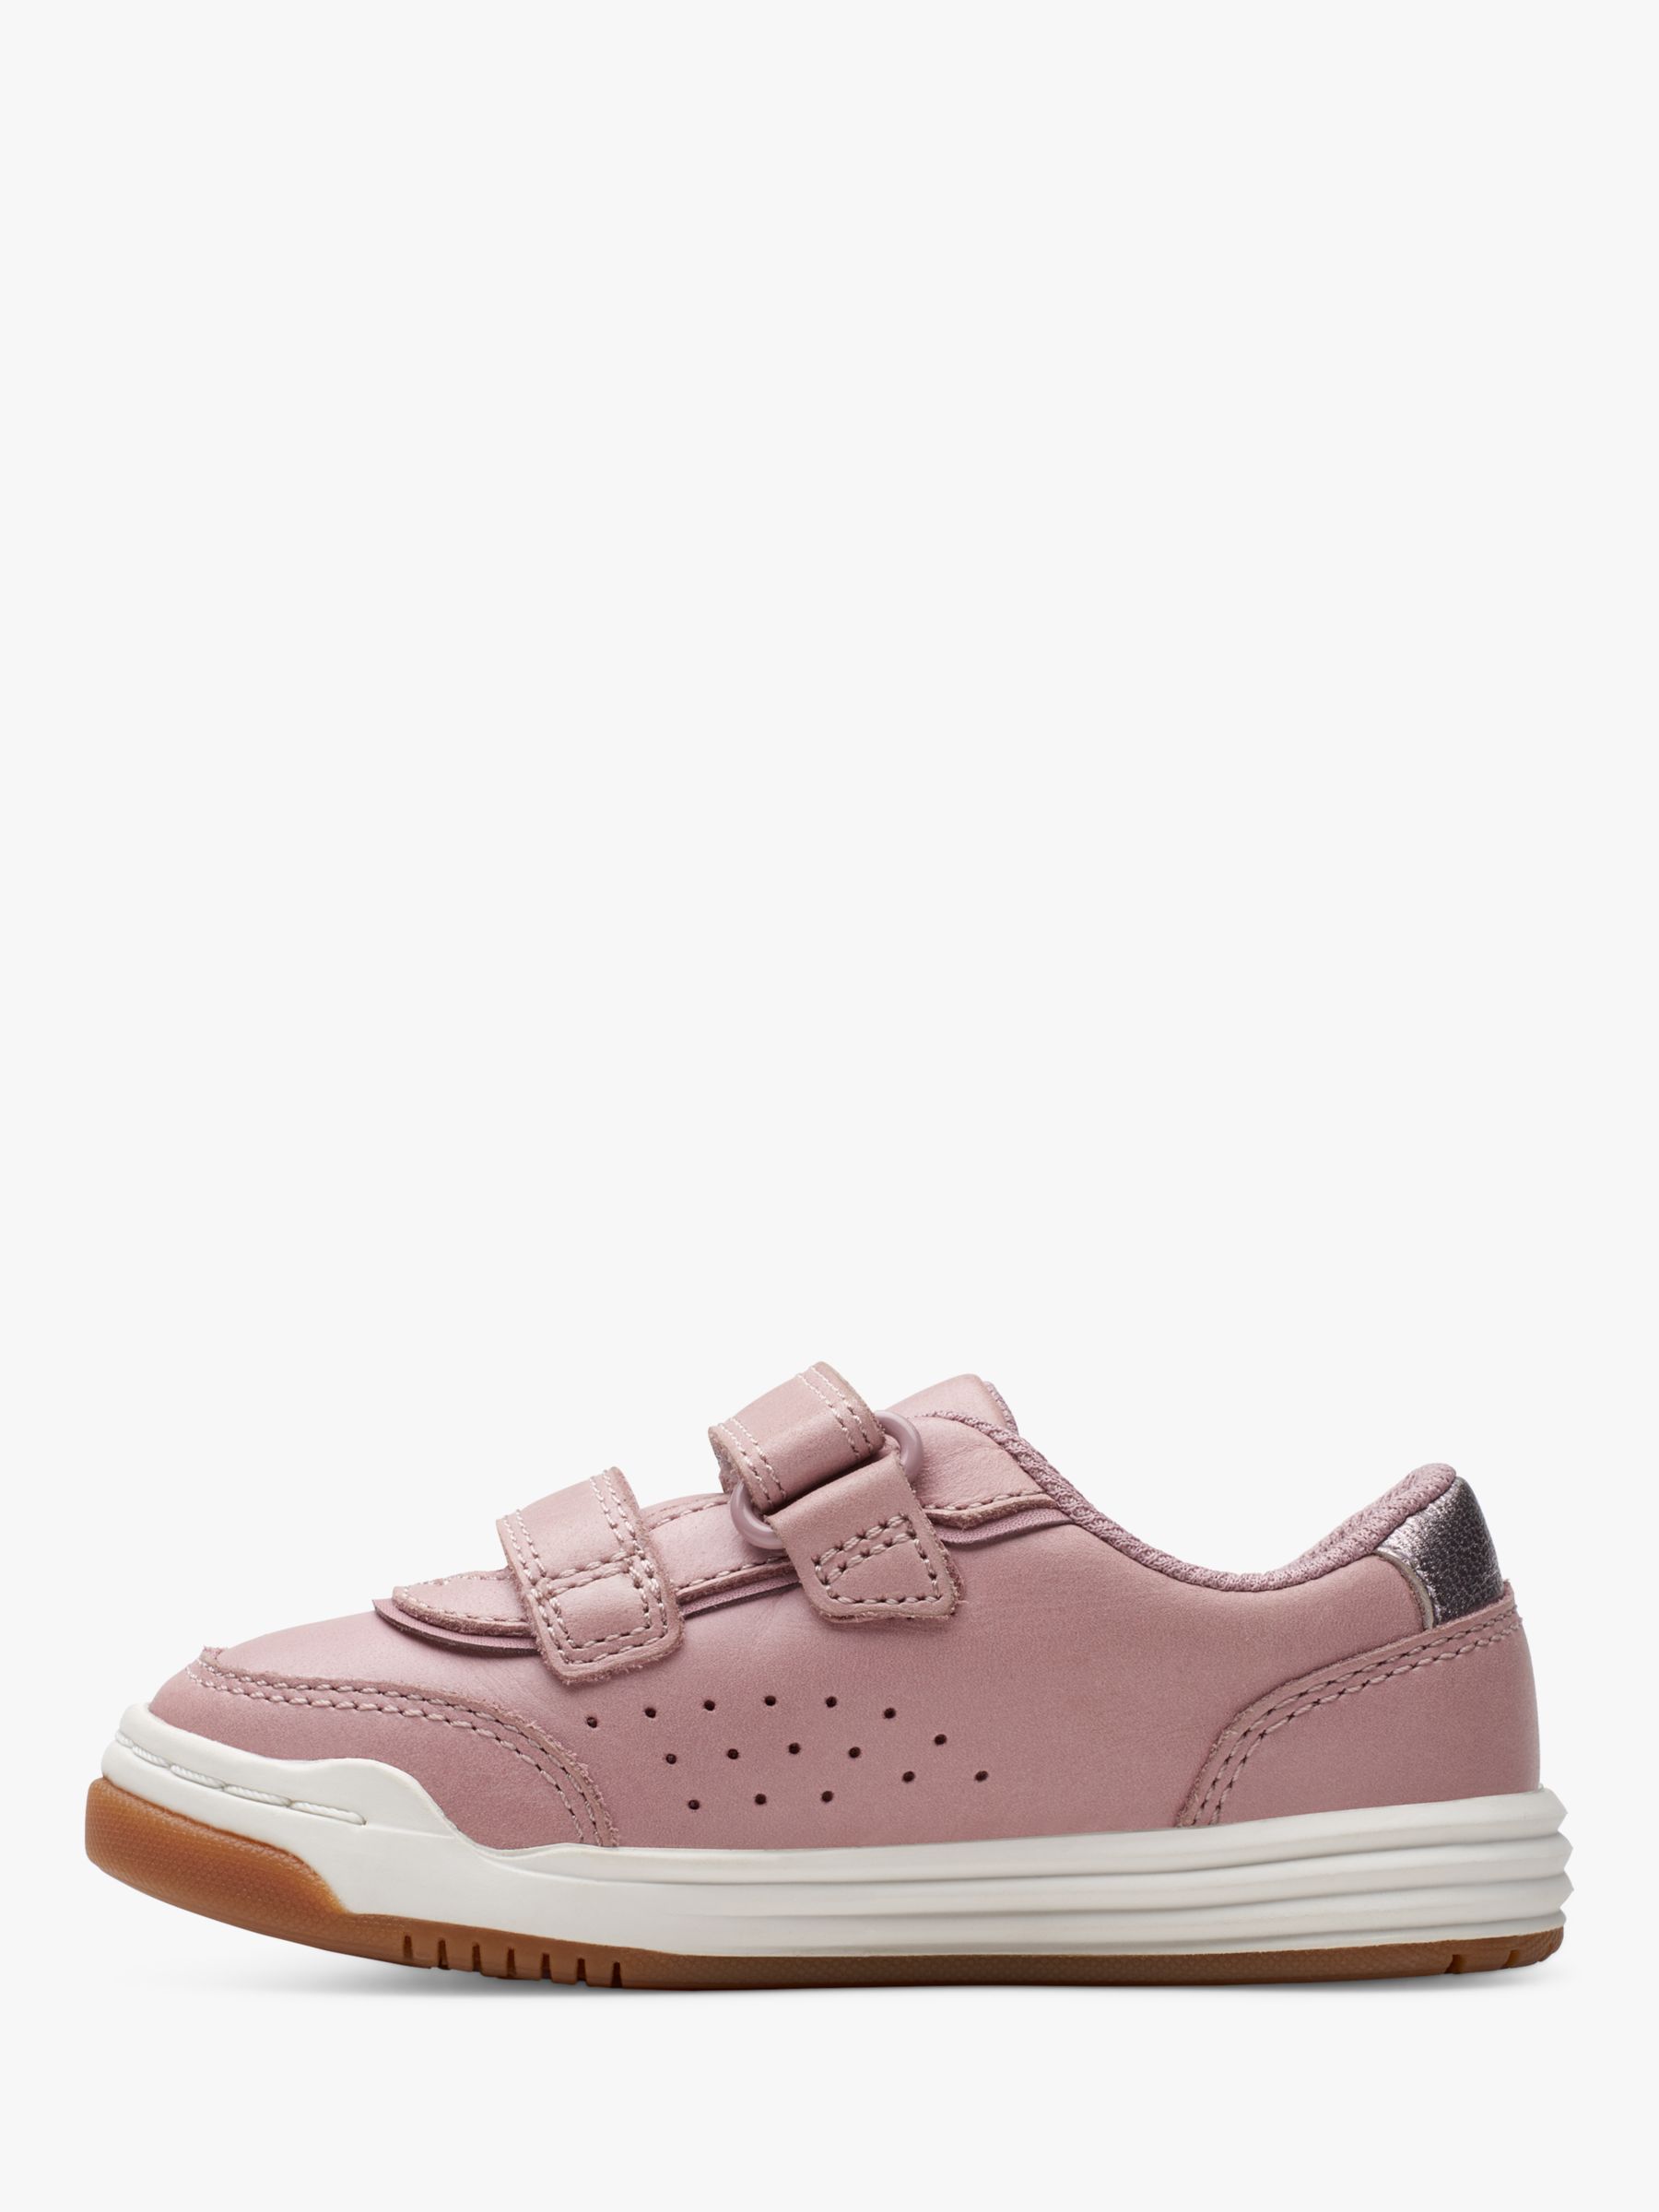 Clarks Kids' Urban Solo Leather Riptape Trainers, Dusty Pink, 4F Jnr